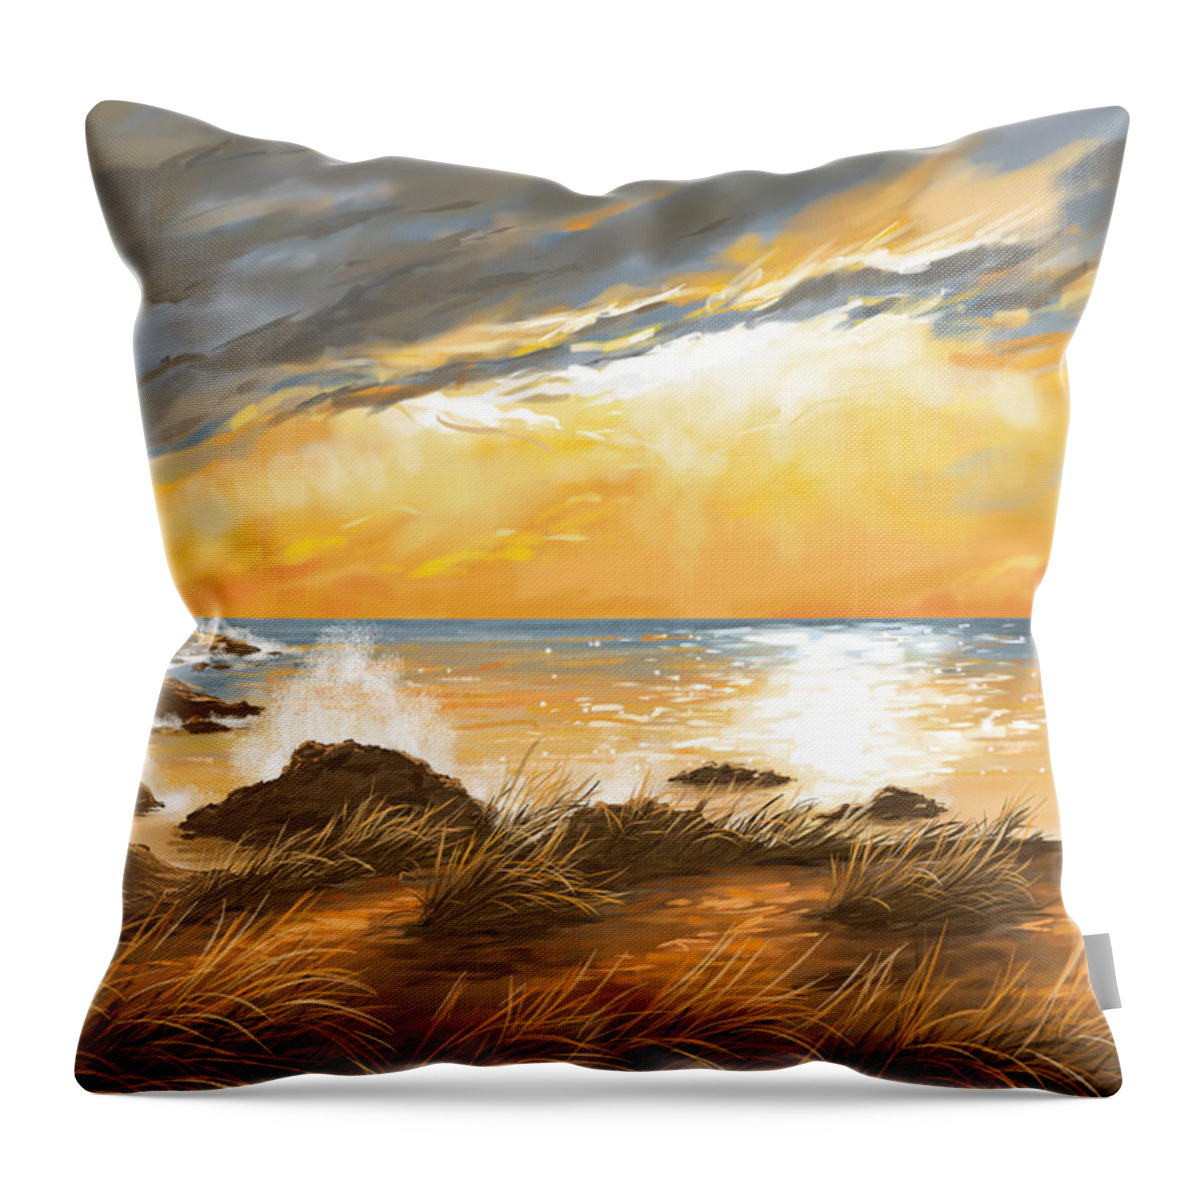 Sunset Throw Pillow featuring the painting Ocean by Veronica Minozzi